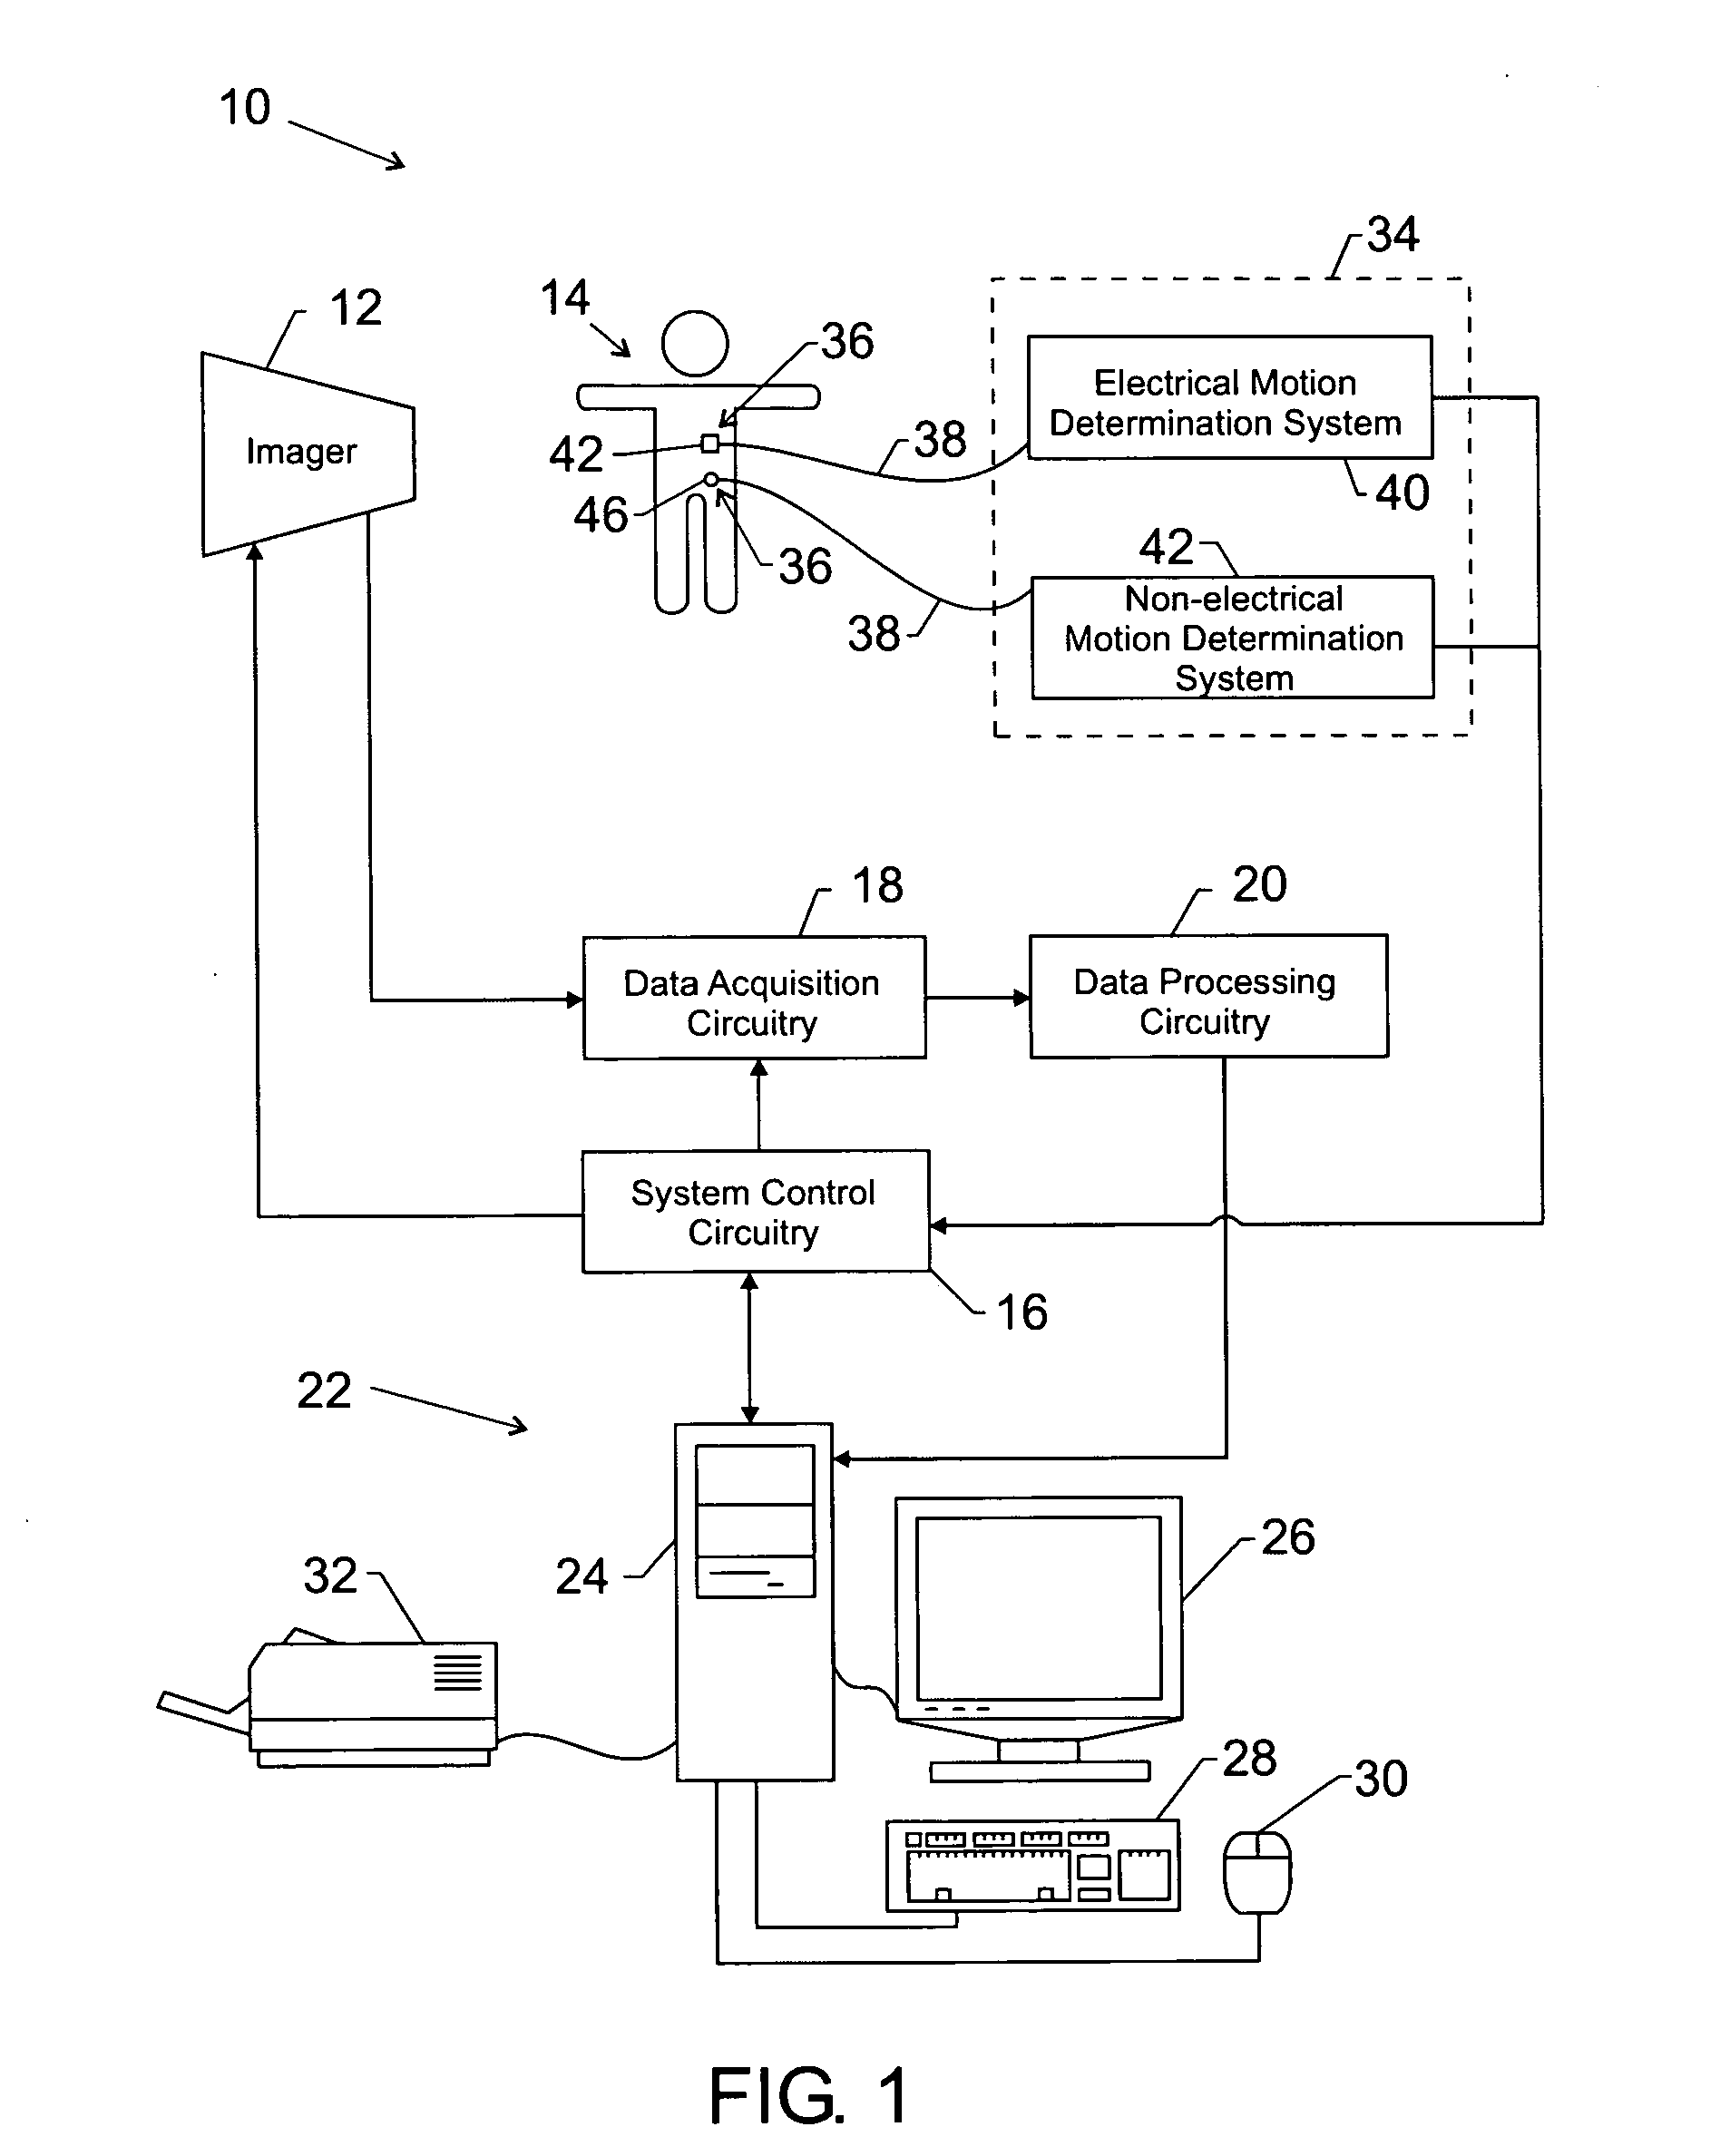 Method and system for composite gating using multiple inputs